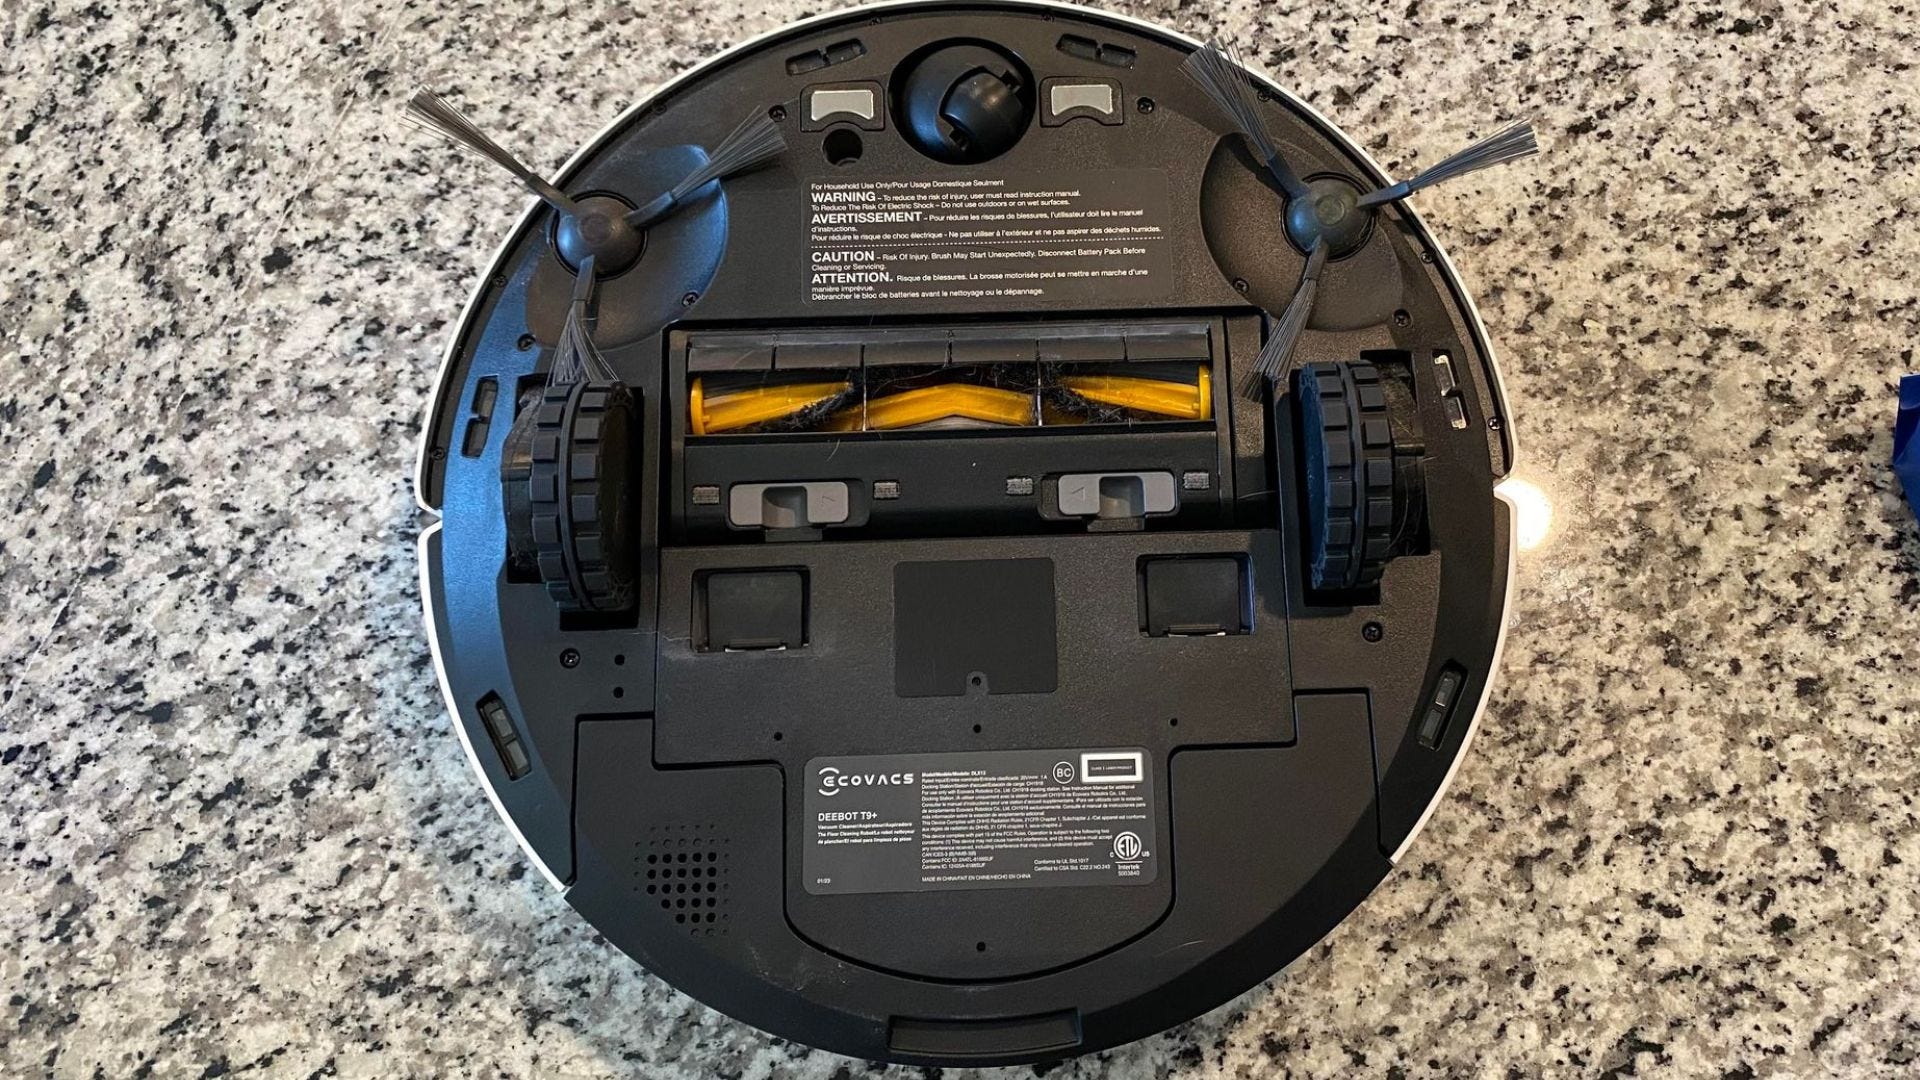 Underside of ECOVACS DEEBOT T9+ with roller and brushes